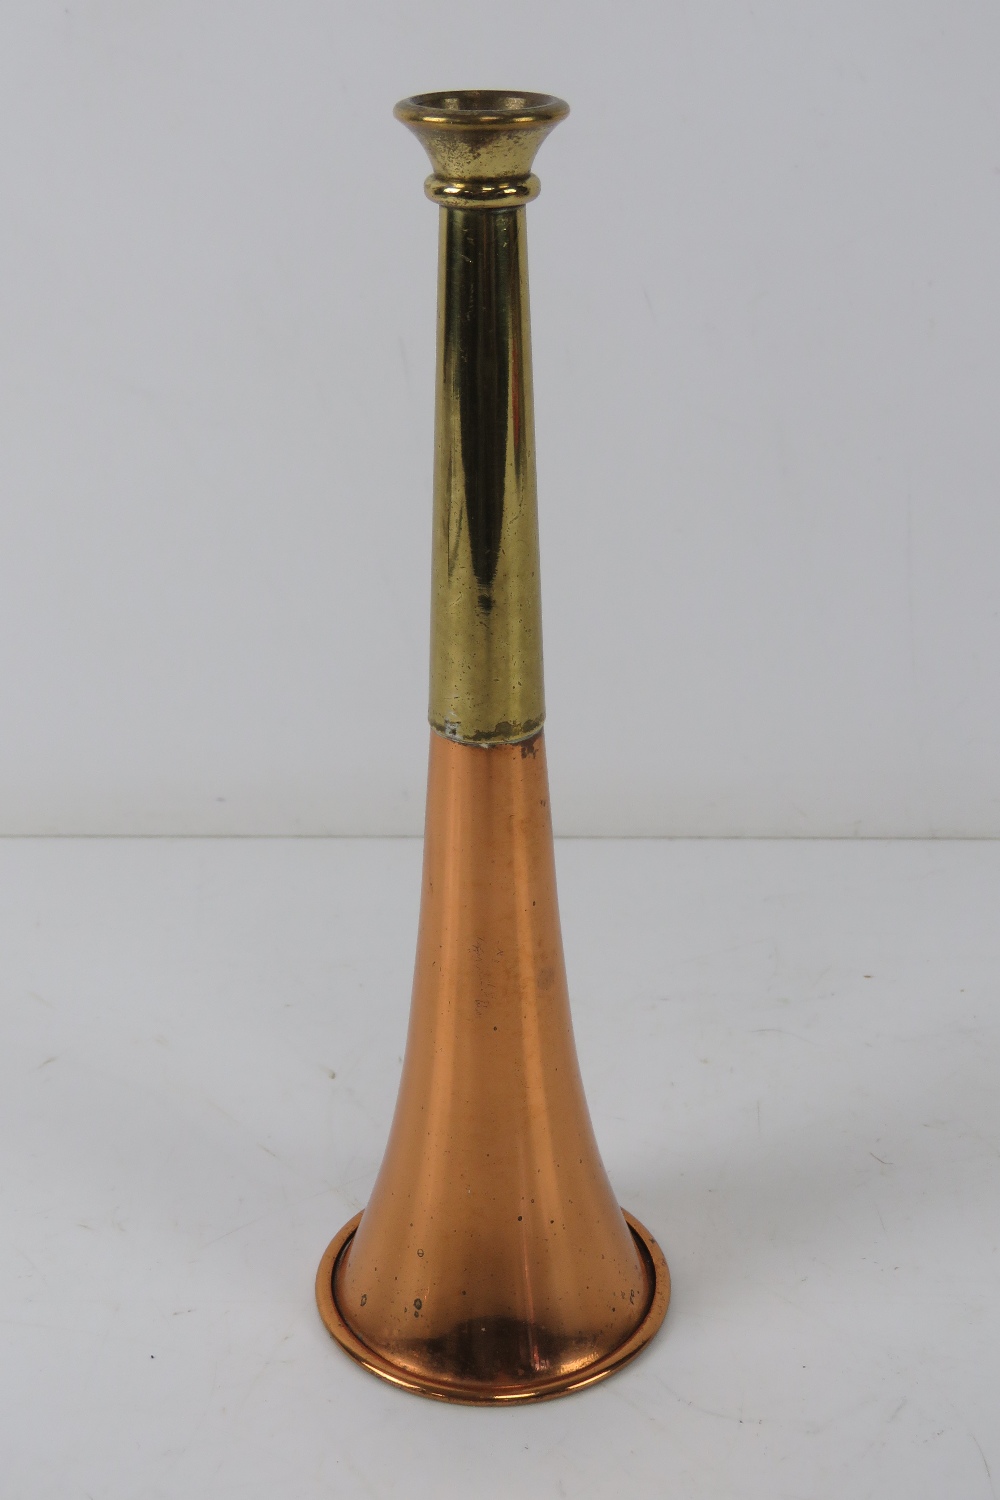 A copper and brass hunting horn standing 21cm high.